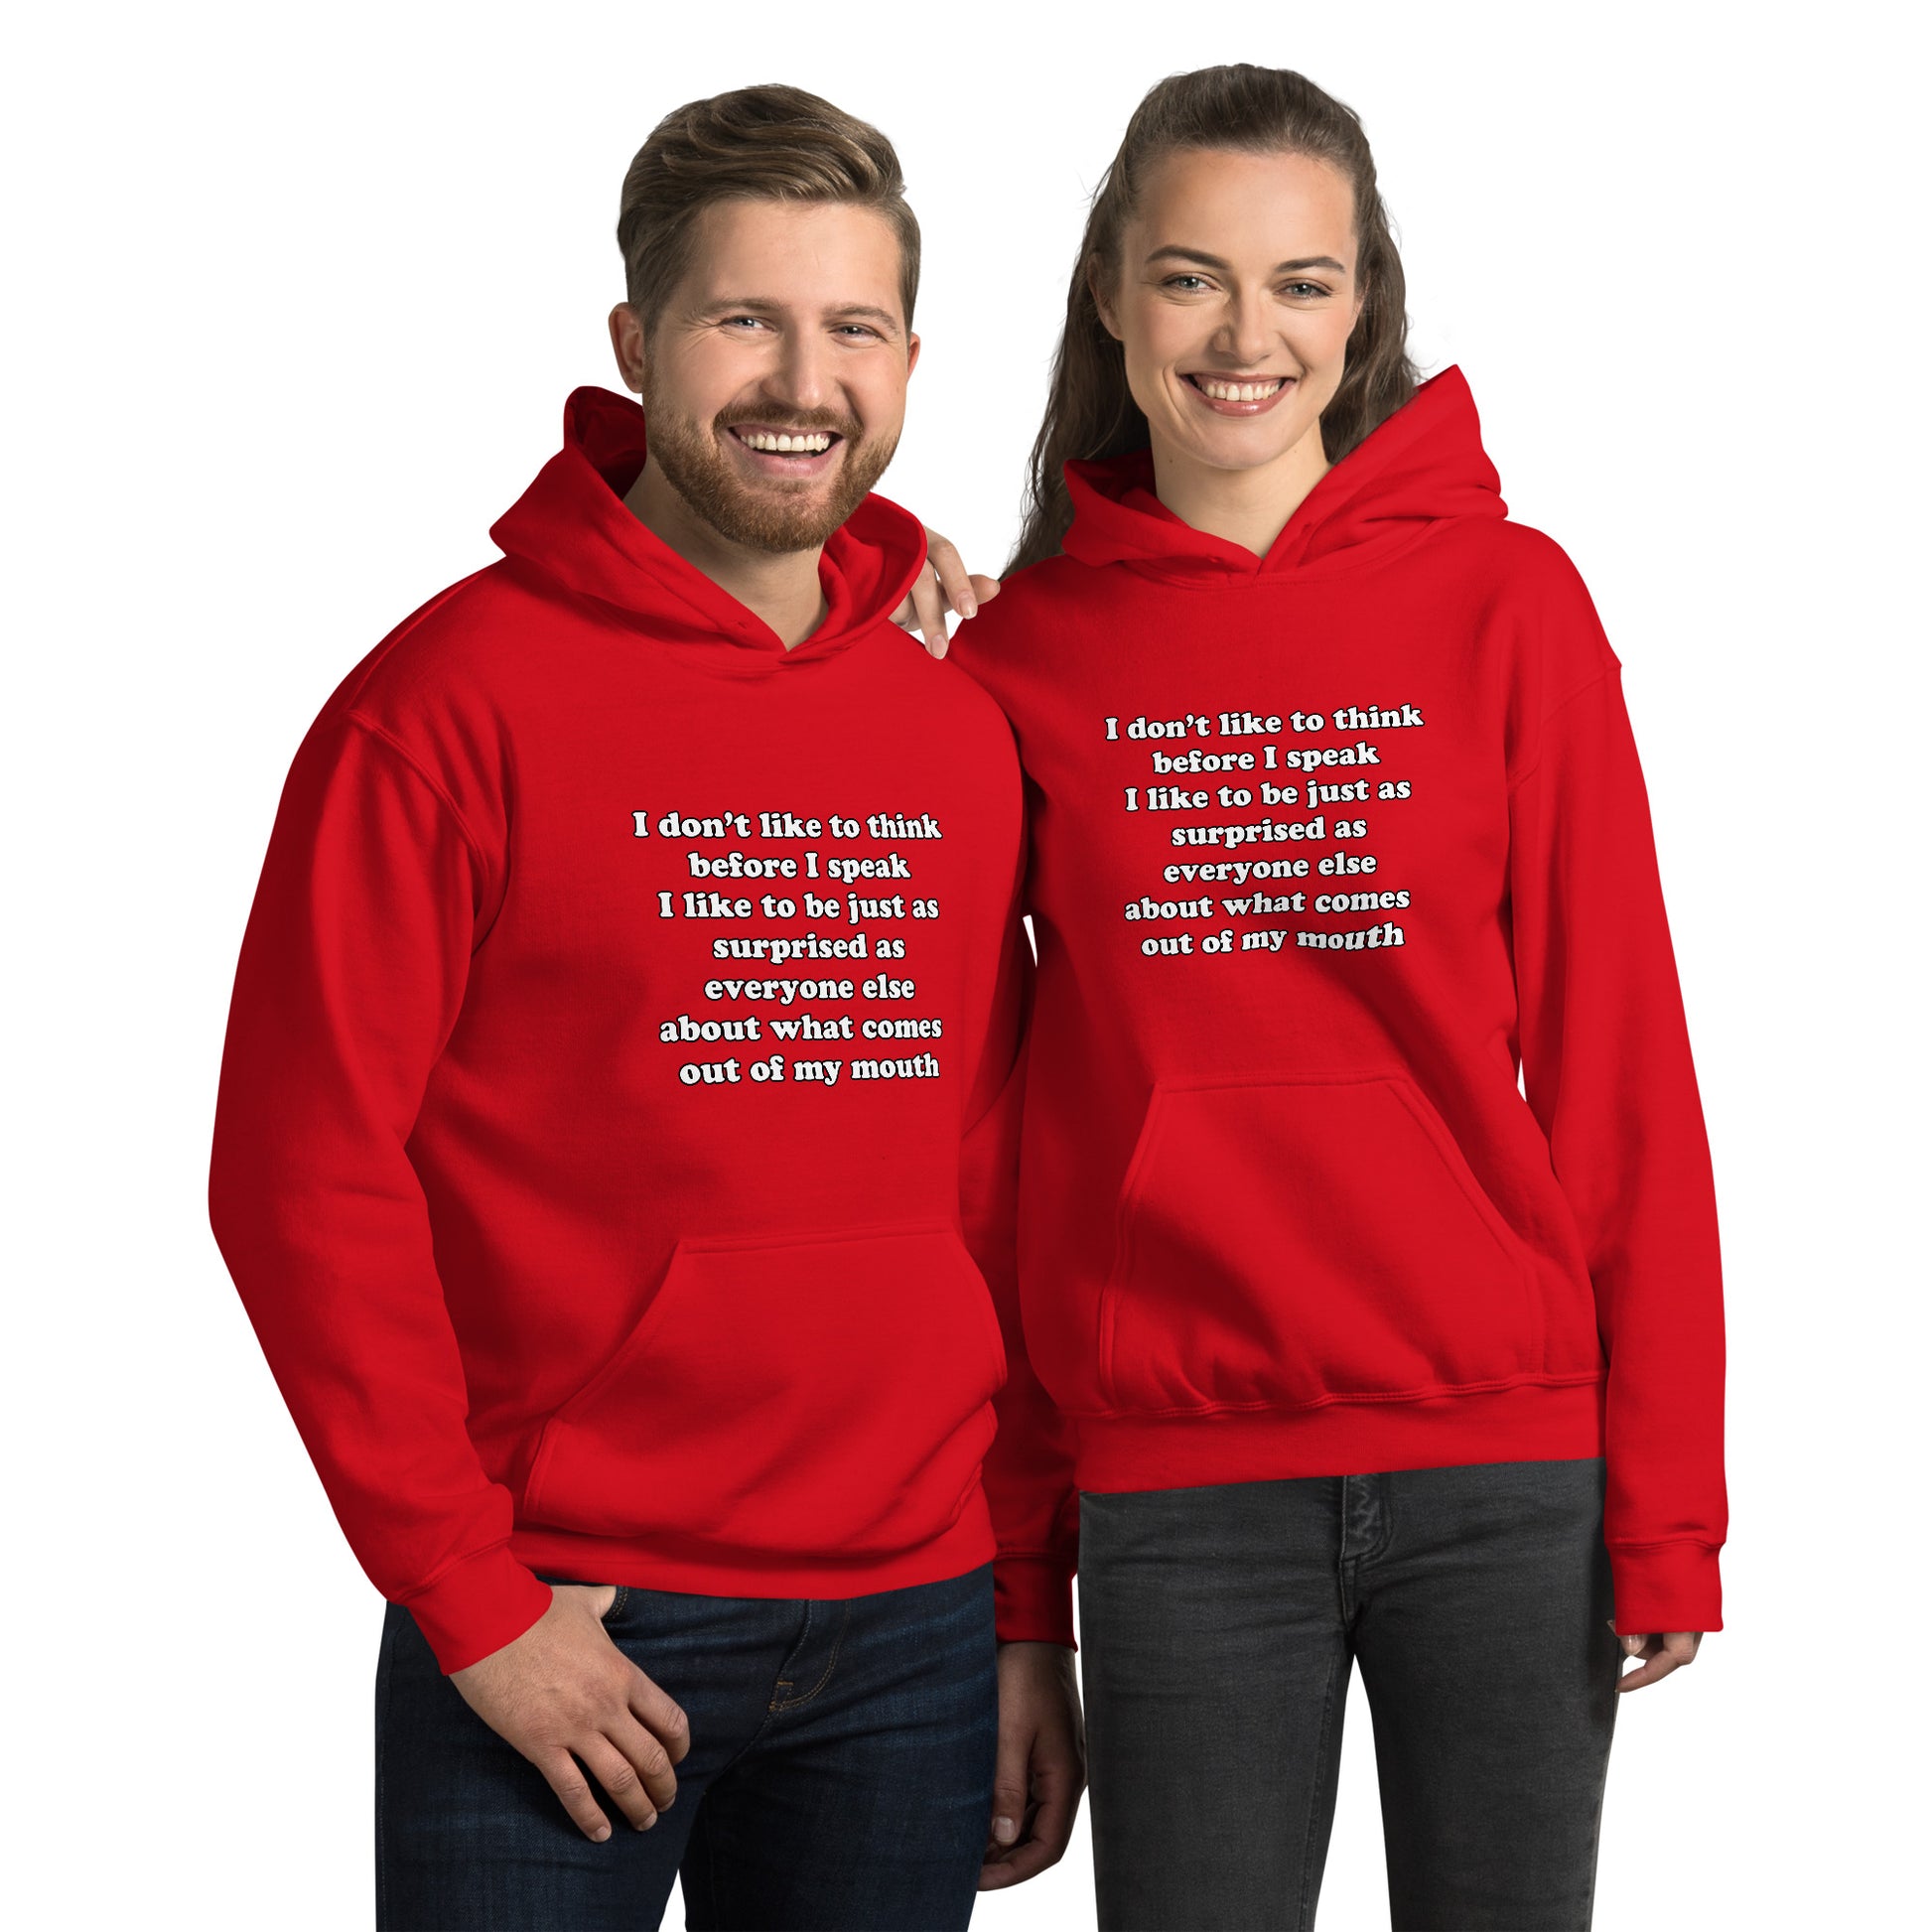 Man and woman with red hoodie with text “I don't think before I speak Just as serprised as everyone about what comes out of my mouth"